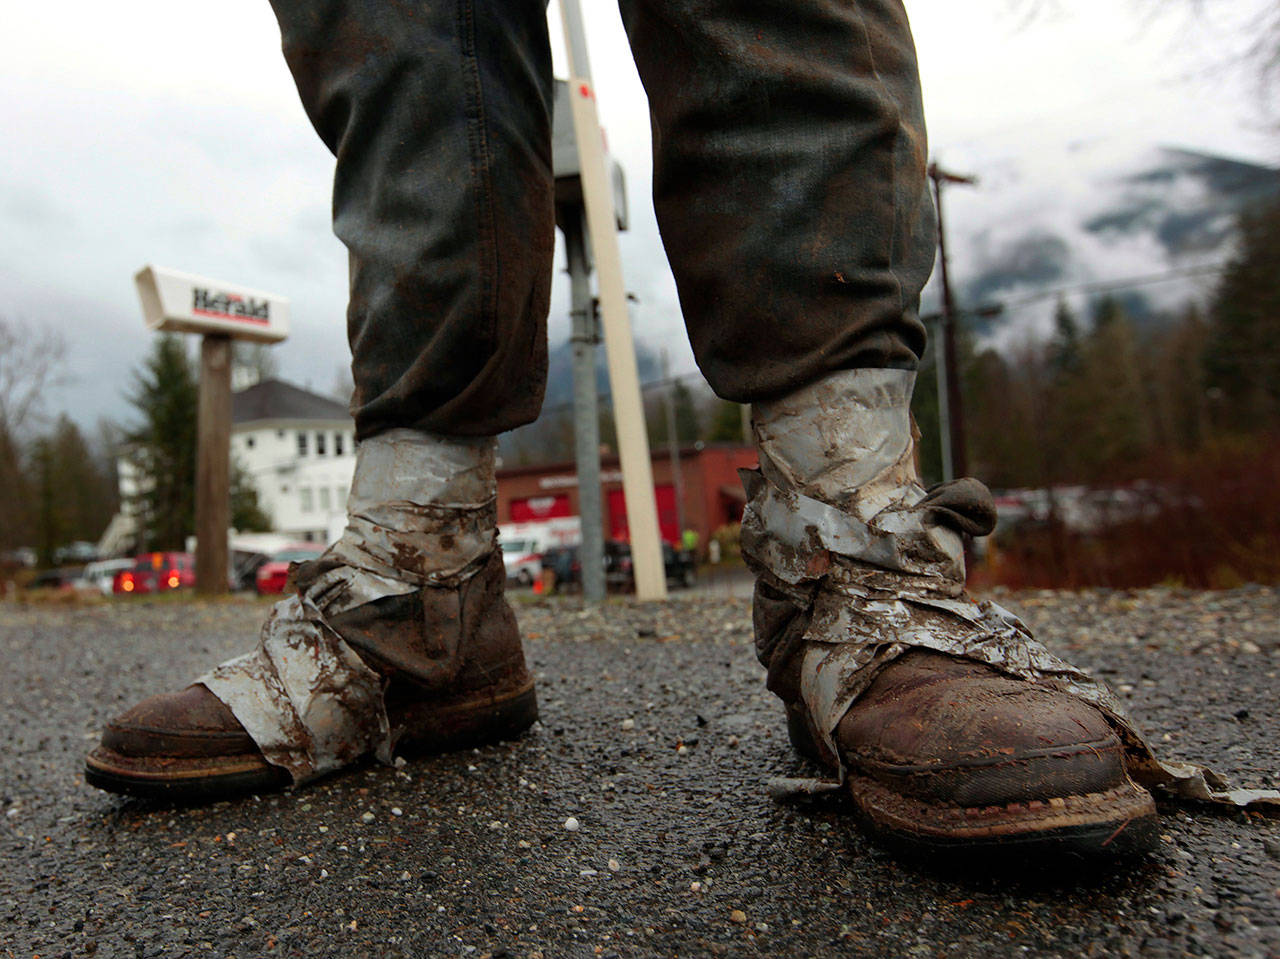 Sonny Blankenship, 18, a senior at Westin High School in Arlington, walks home from the Oso Fire Department after spending the day volunteering in the slide area on March 25, 2014. Blankenship, who lives across the street from the Oso Fire Department, took the day off from school to sort through debris in the slide area just miles from his home. (Mark Mulligan / The Herald)